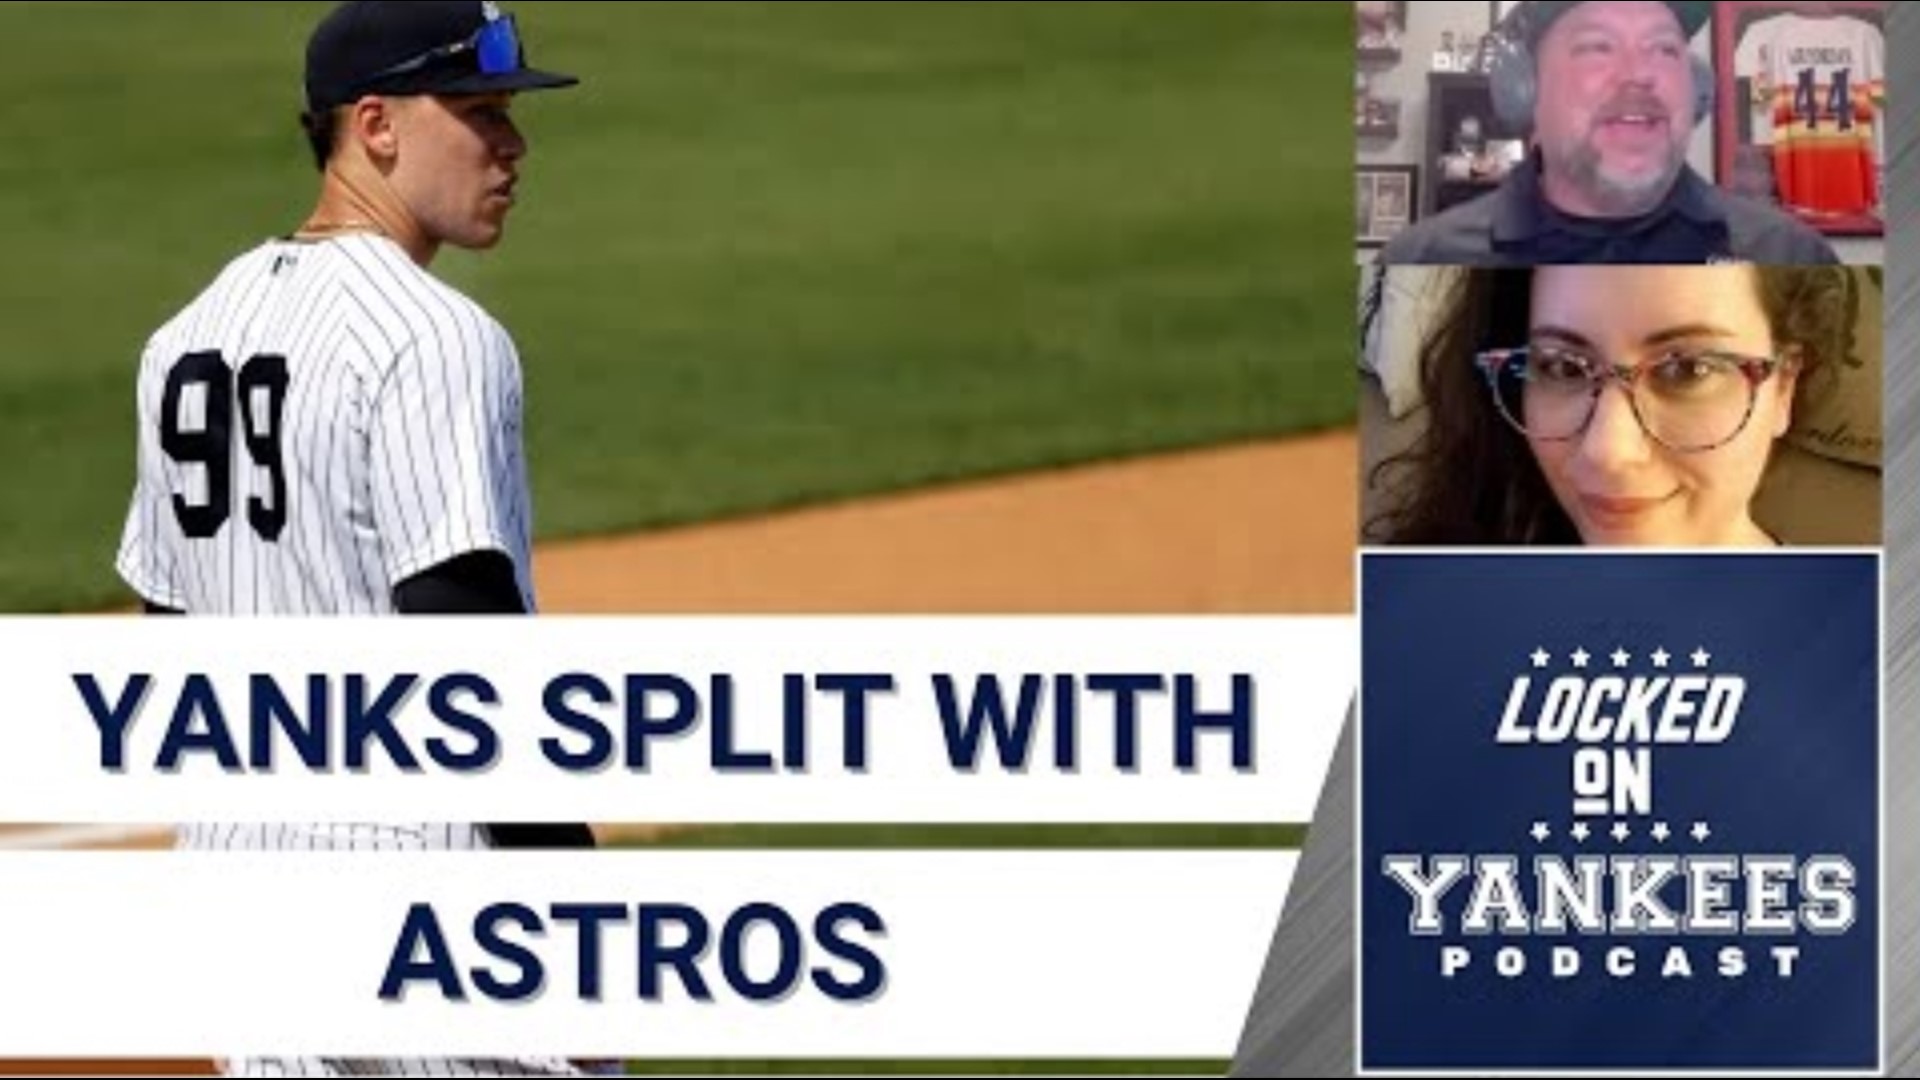 The Yankees were lucky to get a split in their series with the Astros this weekend but they still got it thanks to late-game heroics by Aaron Judge.